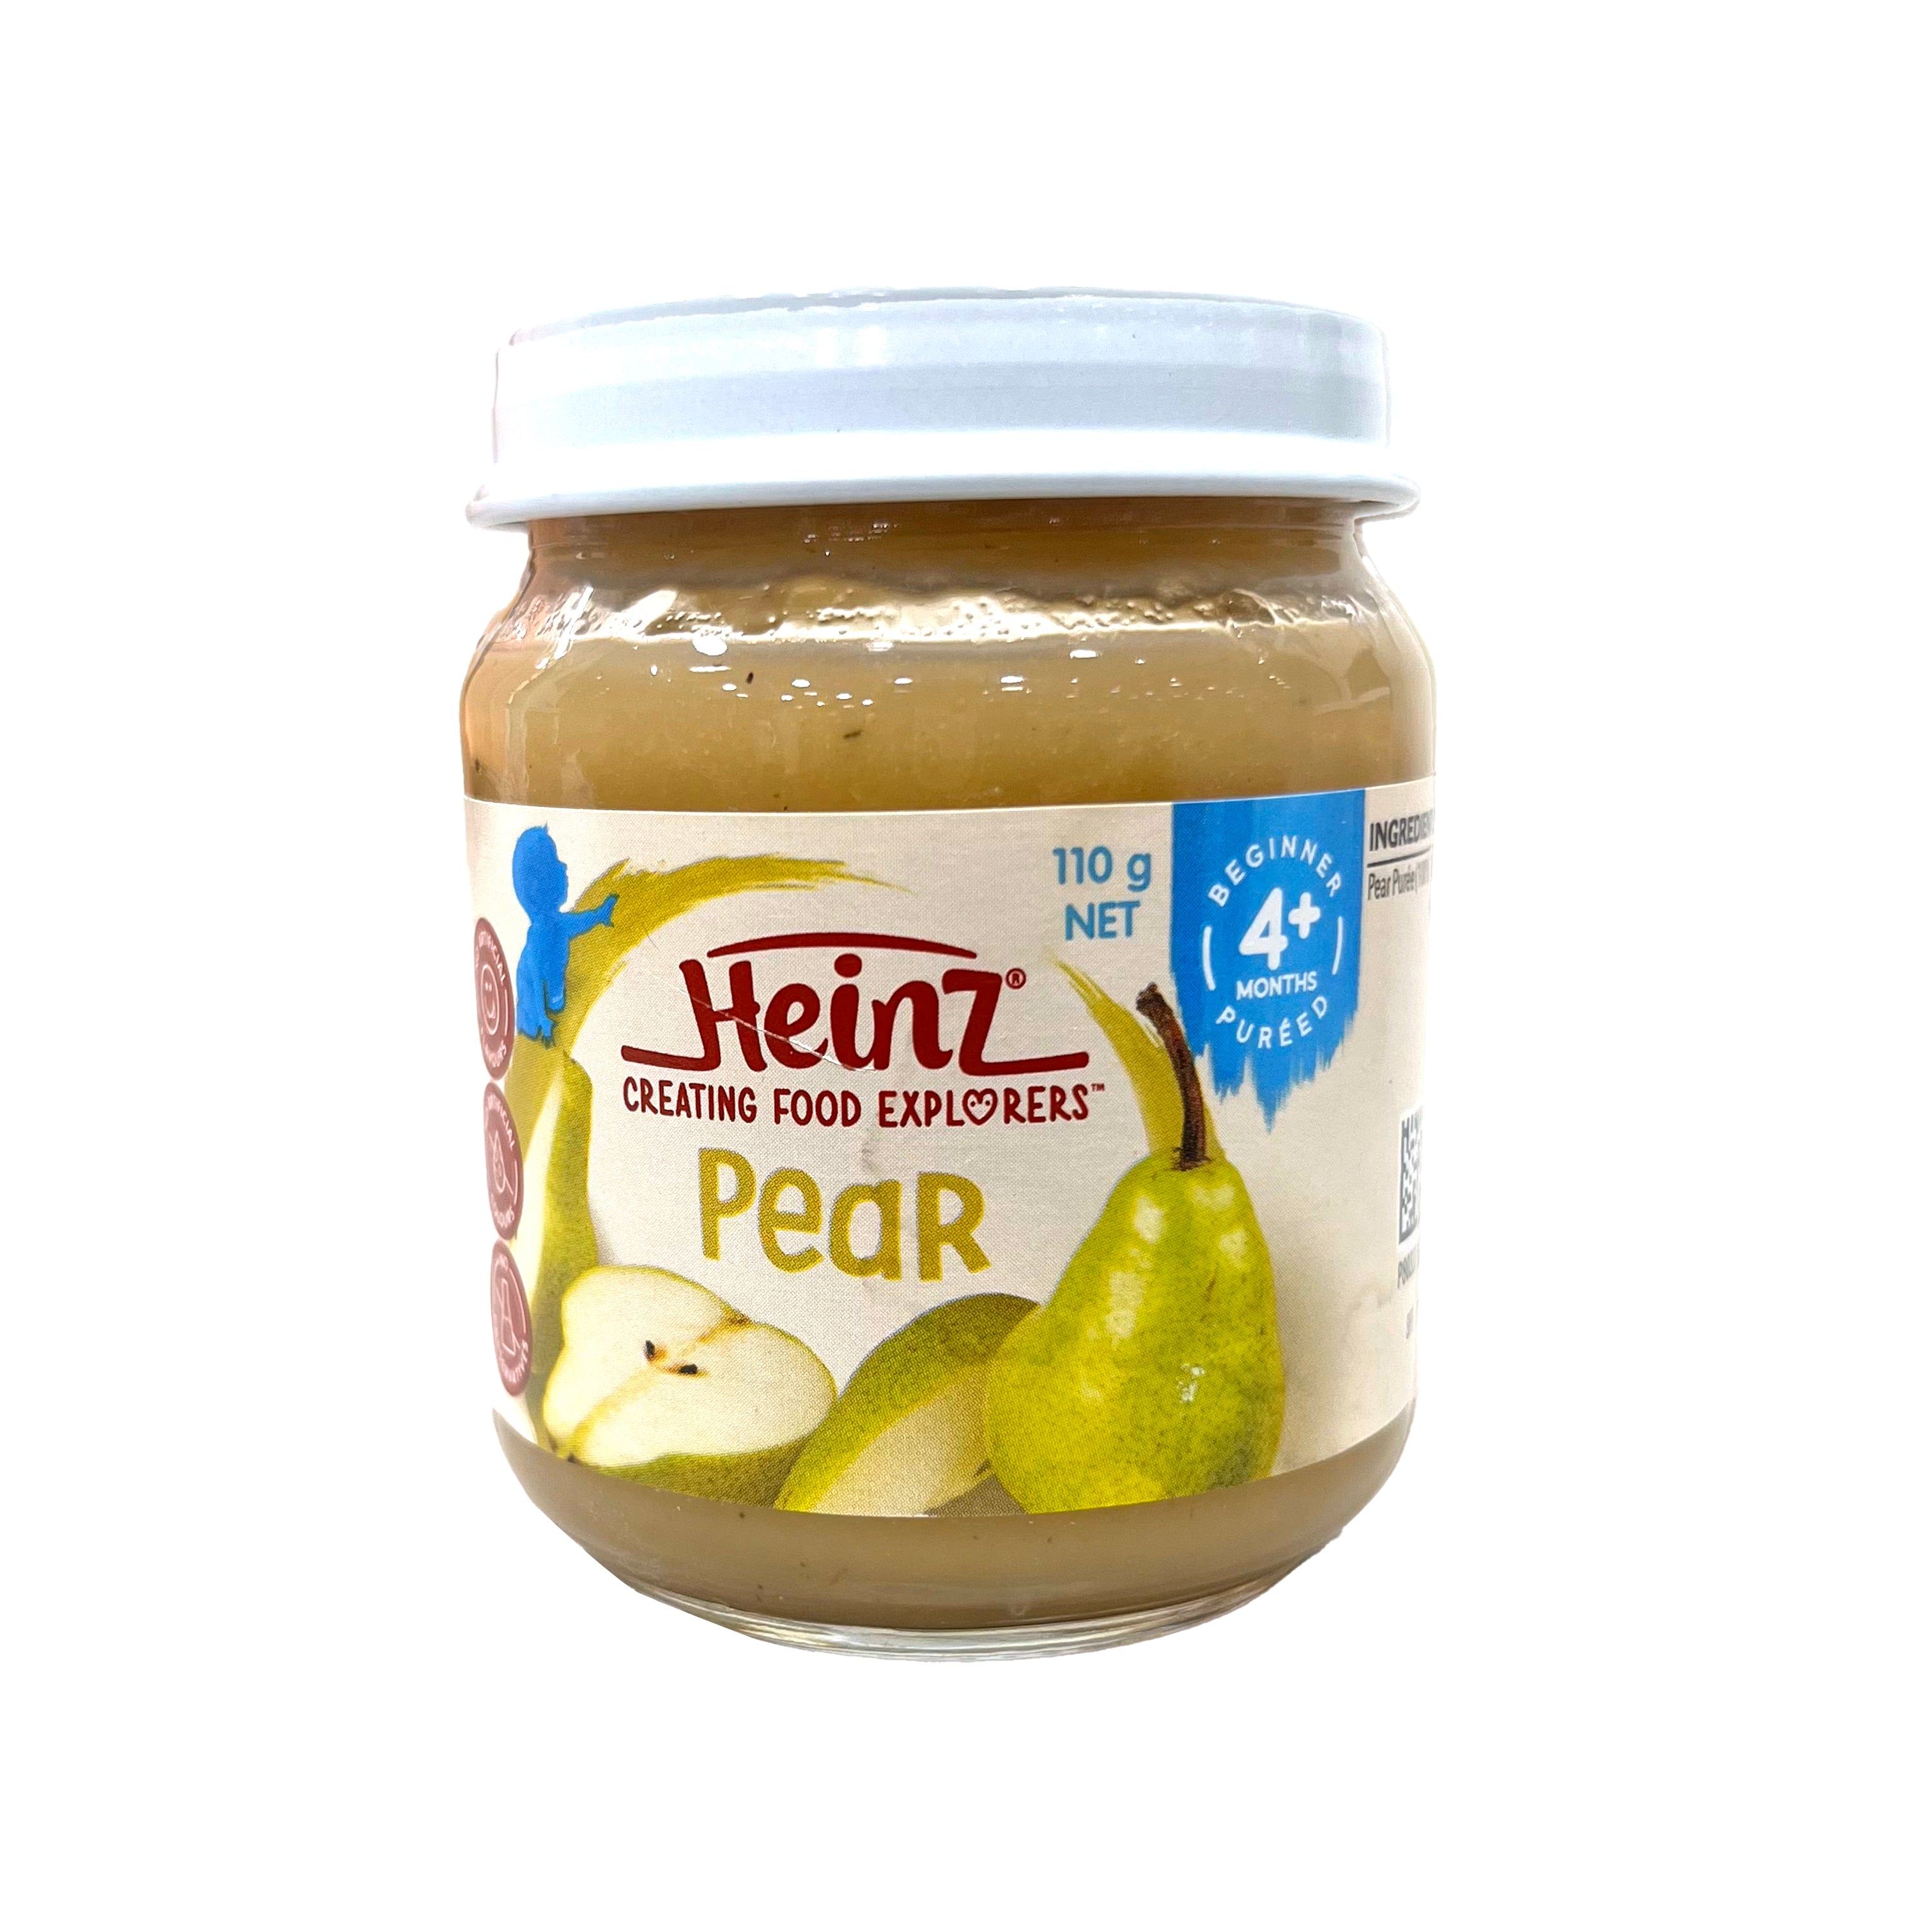 Buy Heinz Puree with Pear for your Baby, 4+months, 110gms Online in India at uyyaala.com